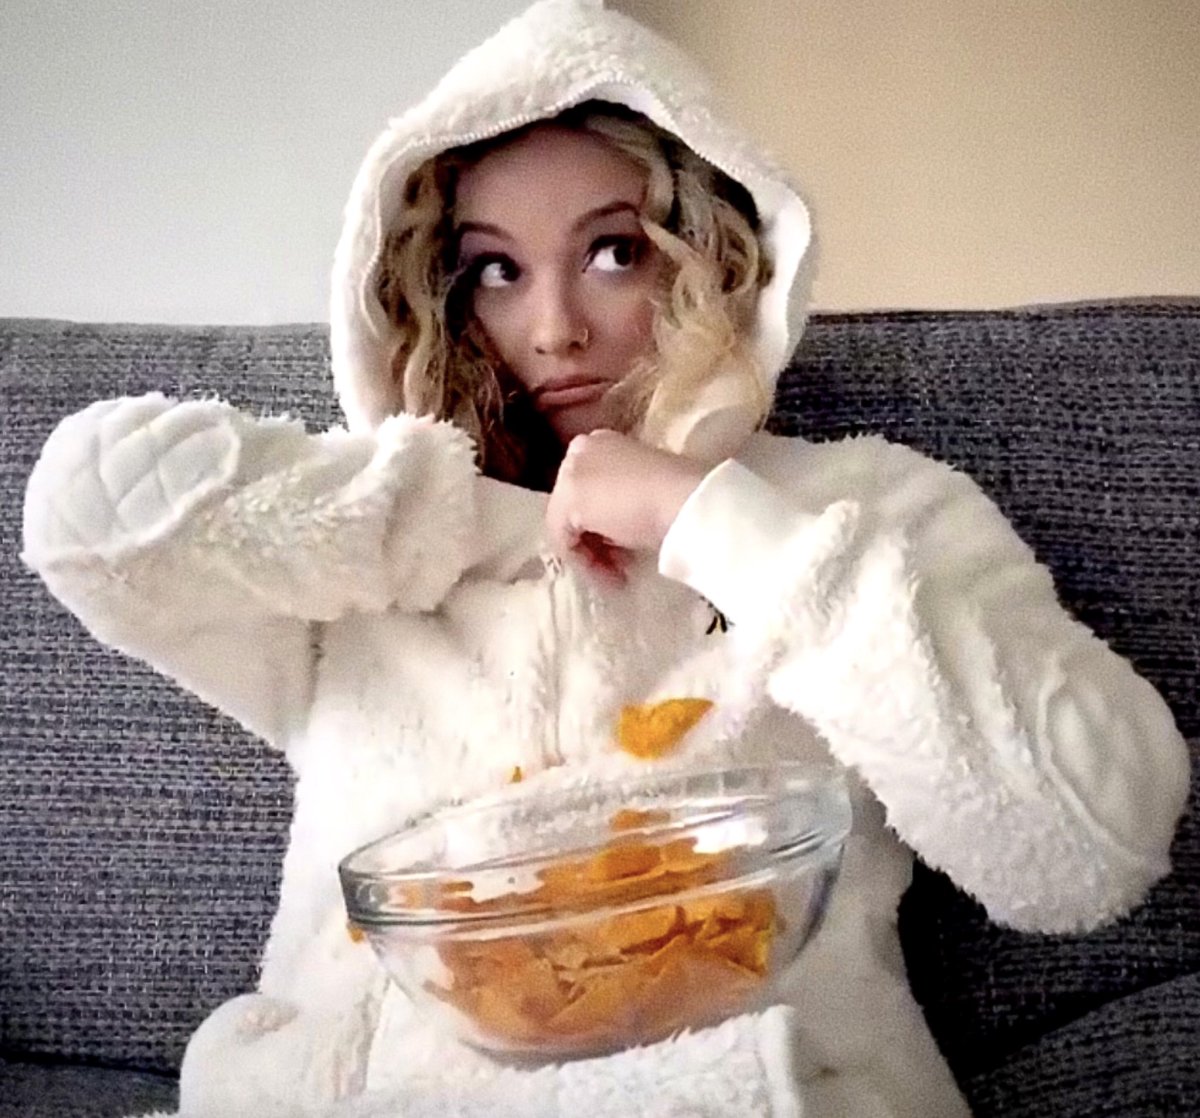 Day 23. Jade was me today in pajamas and an extra hooded diver (because it's very cold), plus a snack and a movie by Ghibli on Netflix. <3 #JadeThirlwall  #LMBreakUpSong  #LMTV  #LittleMix  #BreakUpSong  #Served  #MTVServed